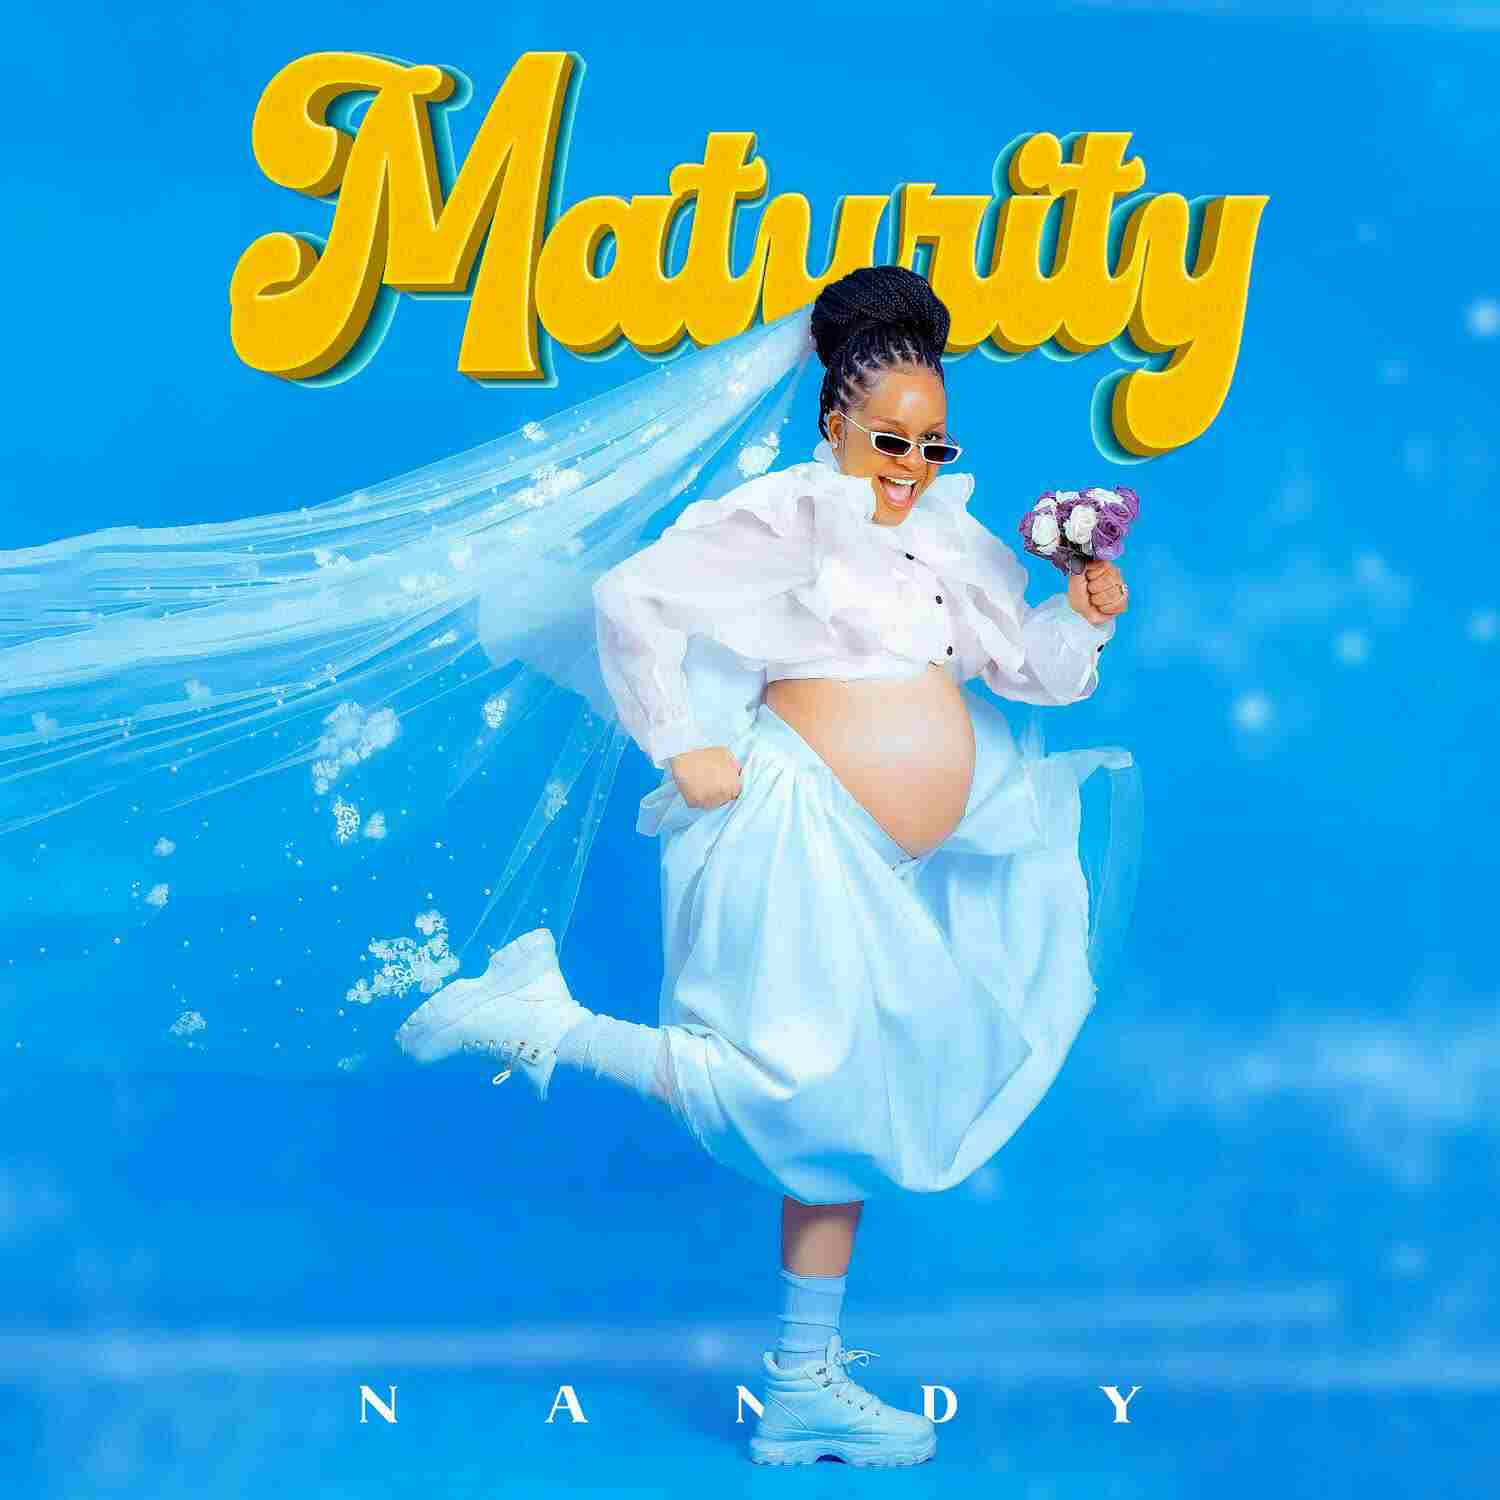 Ebelebe song by Nandy ft. Natty